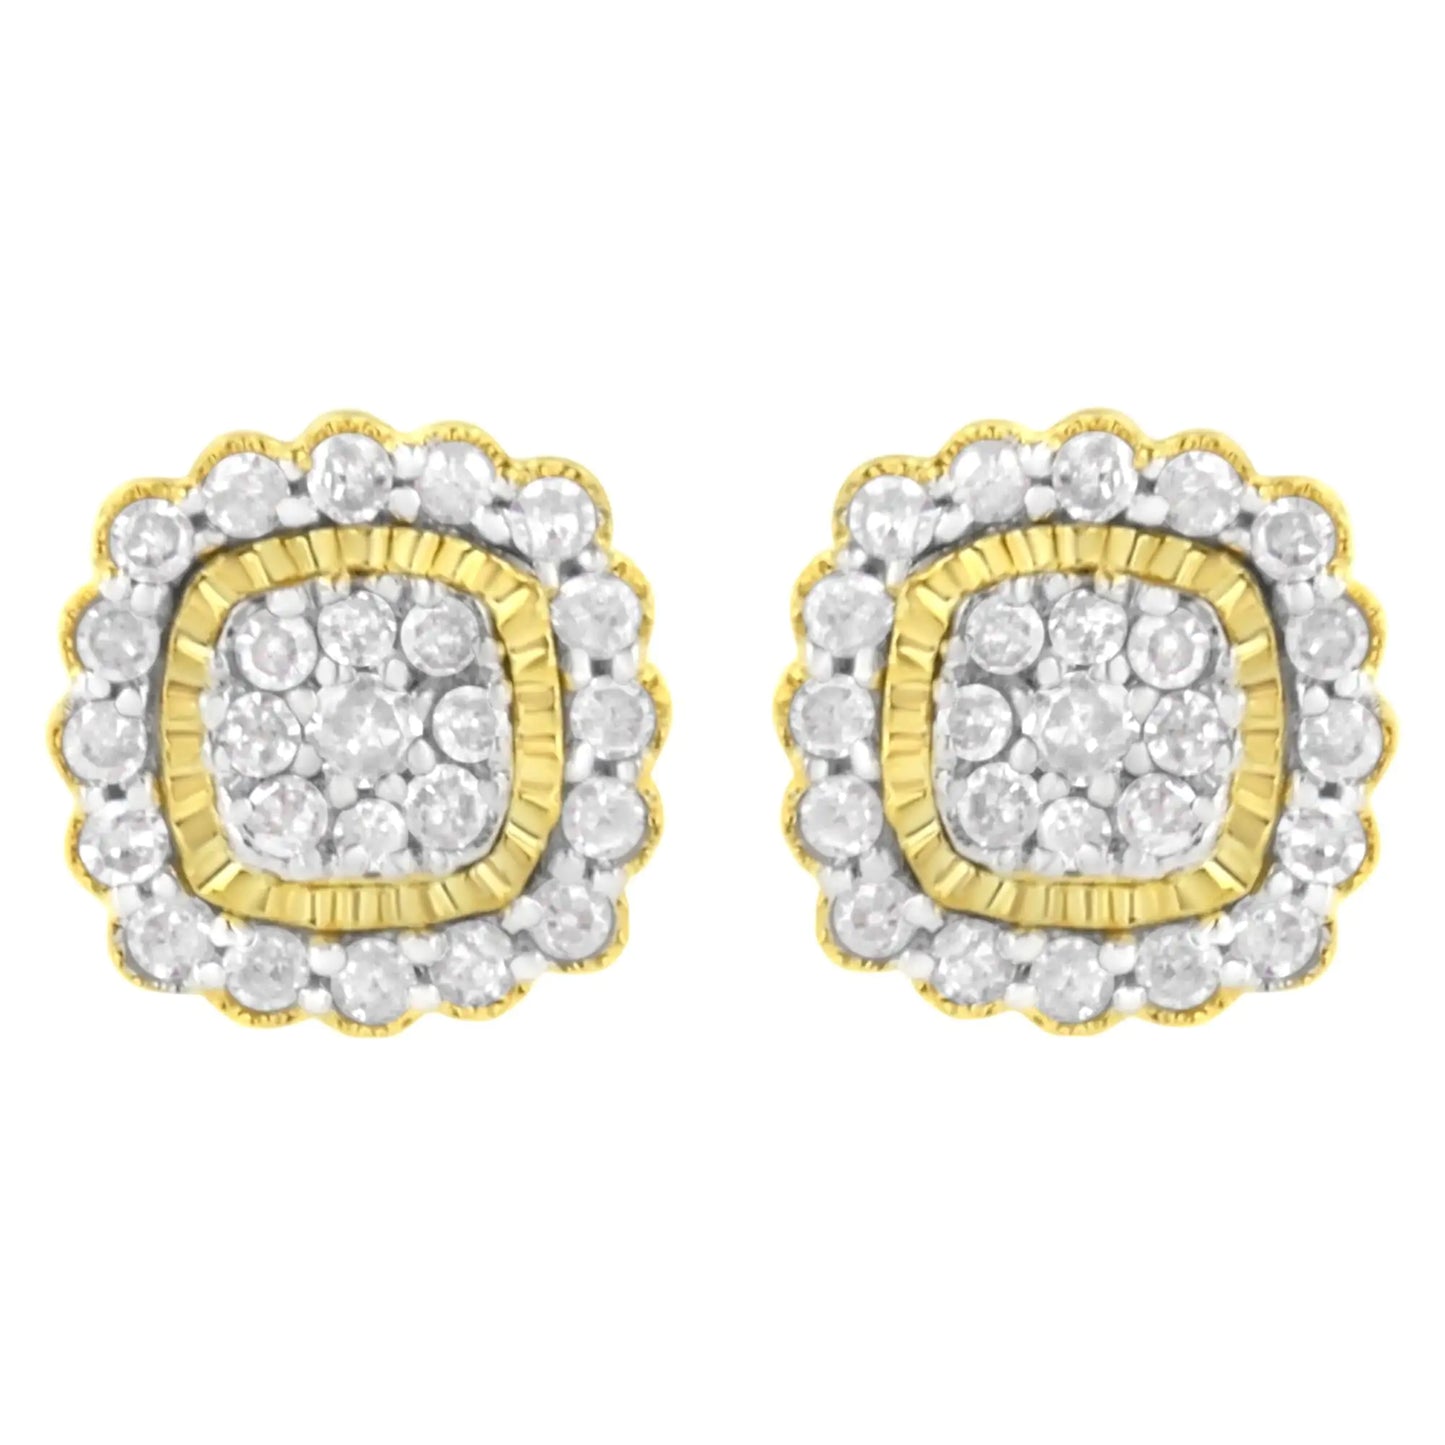 10K Yellow Gold Plated .925 Sterling Silver 1/2 cttw Round-Cut Diamond Halo Sunburst Stud Earrings (I-J Color, I2-I3 Clarity)